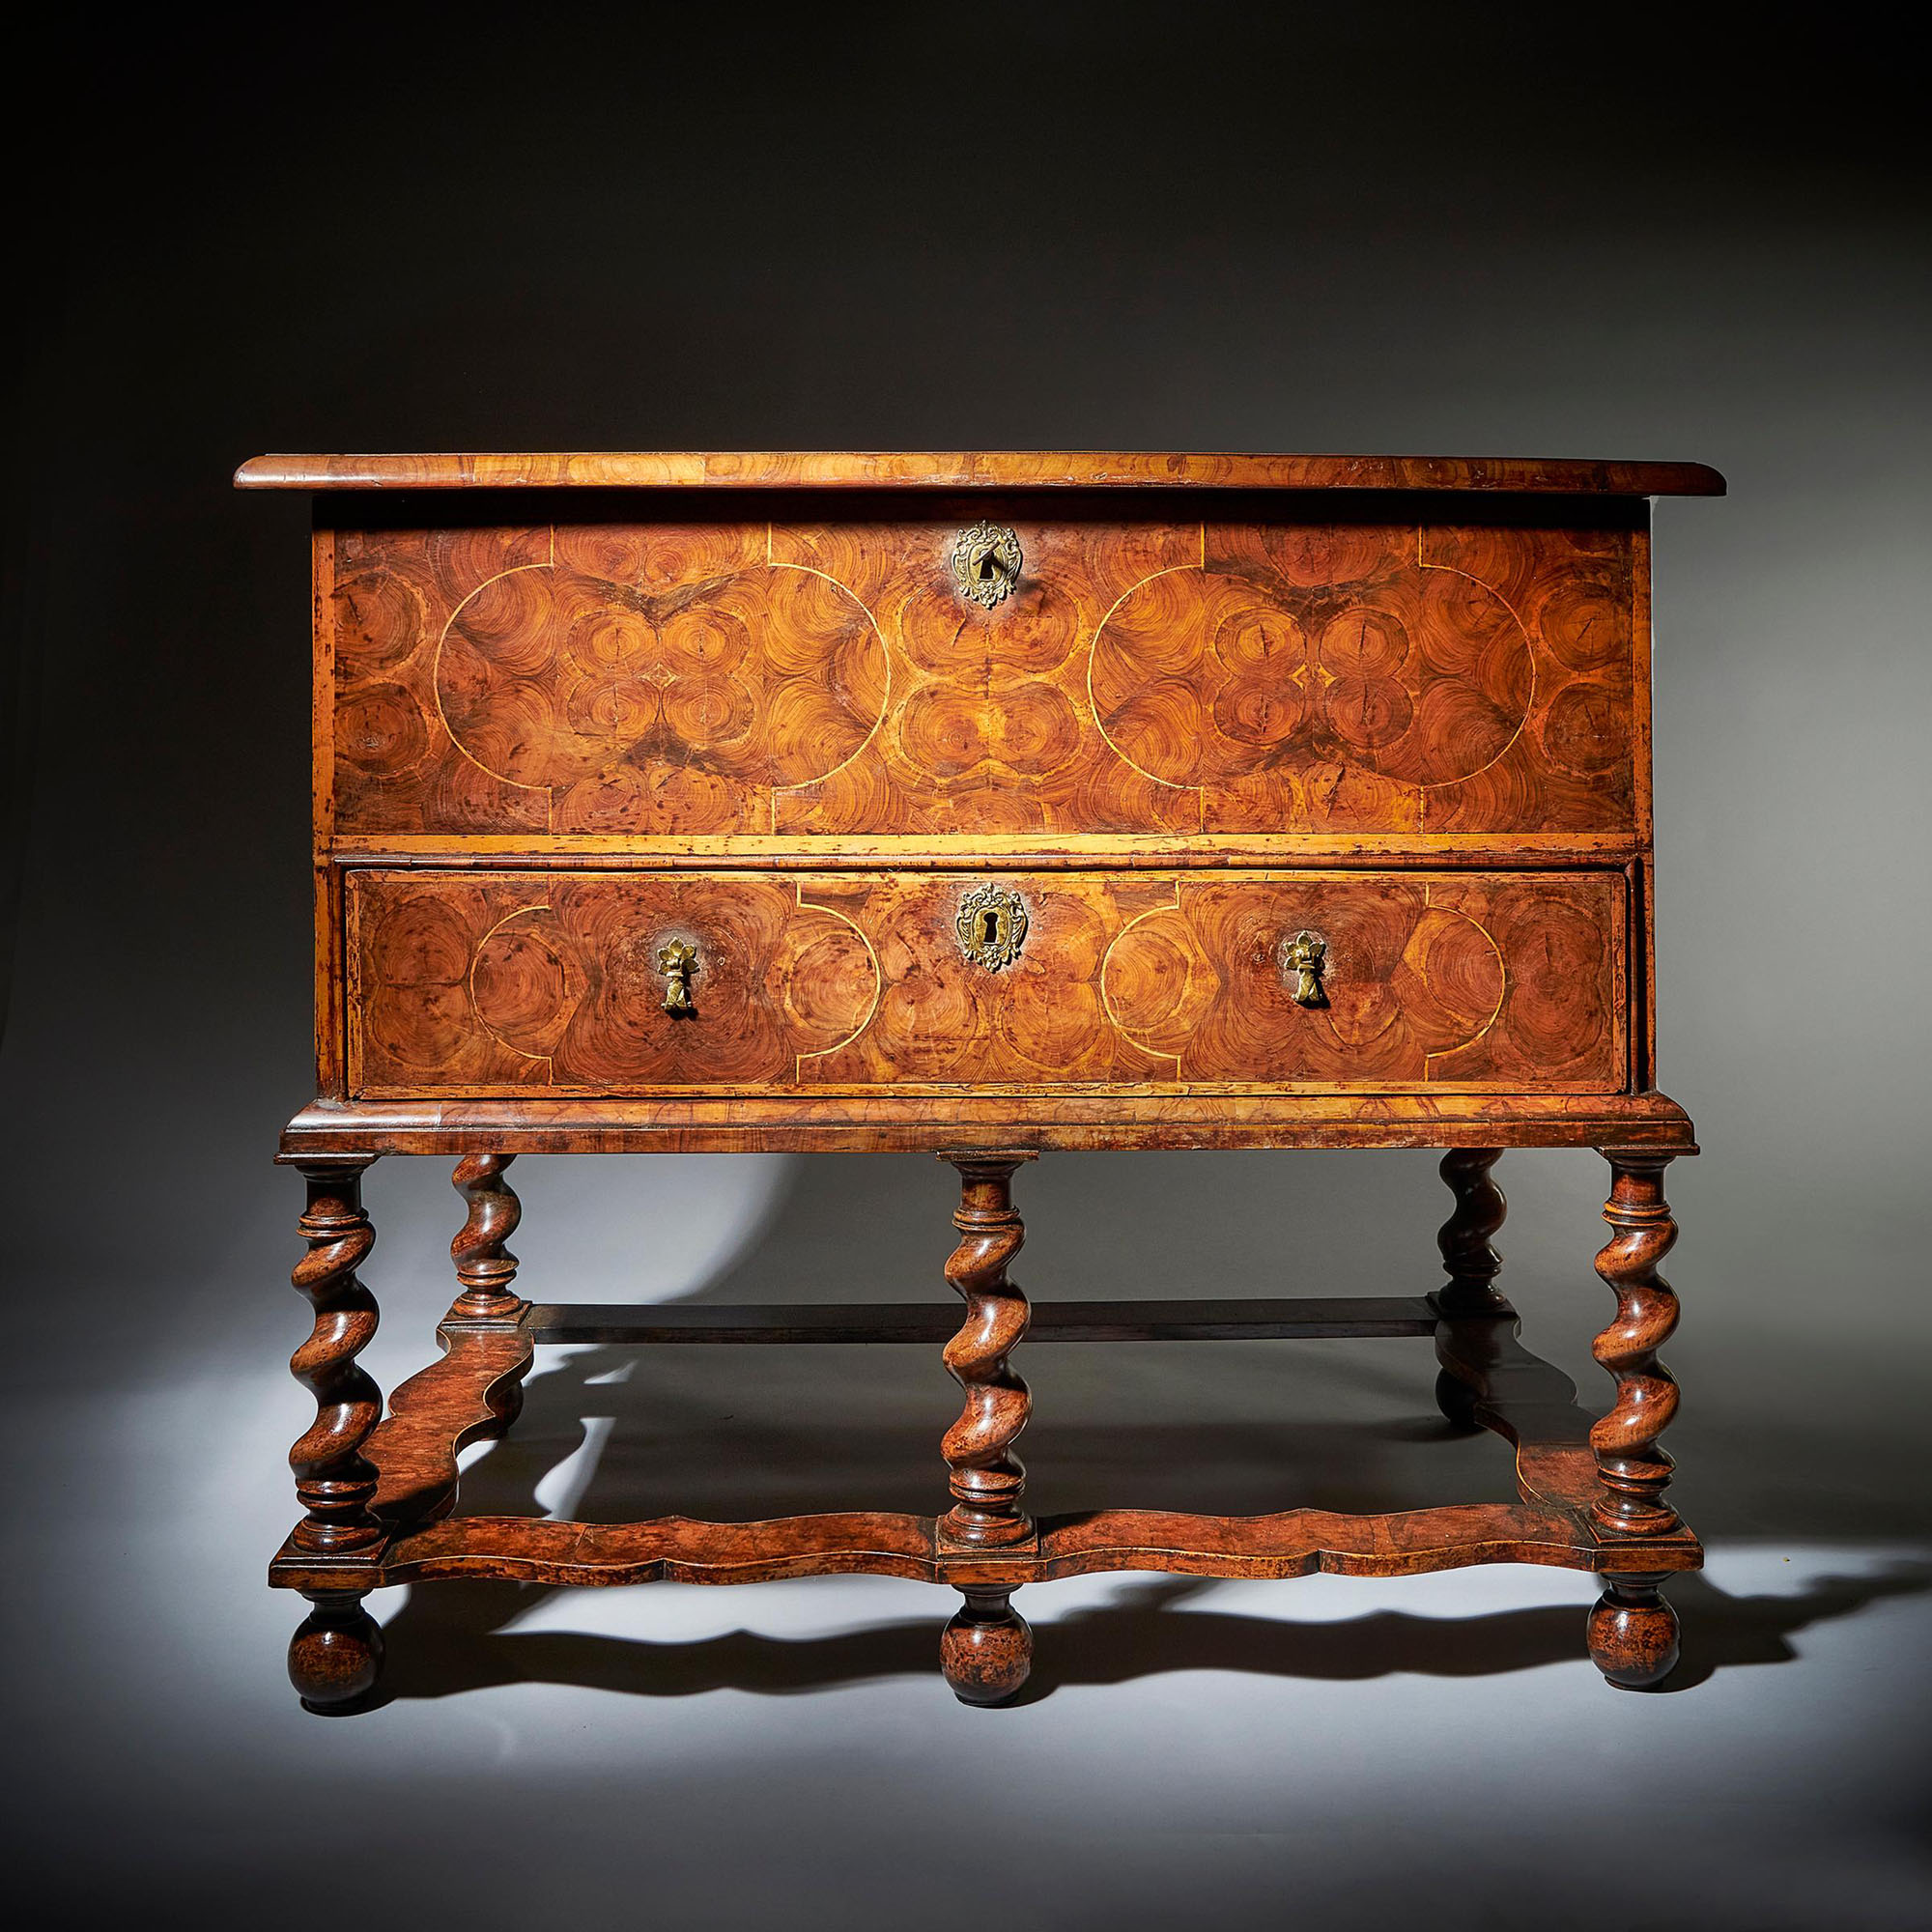 A fine and extremely rare 17th century William and Mary baroque olive oyster chest on stand or 'table box', circa 1675-1690. 1